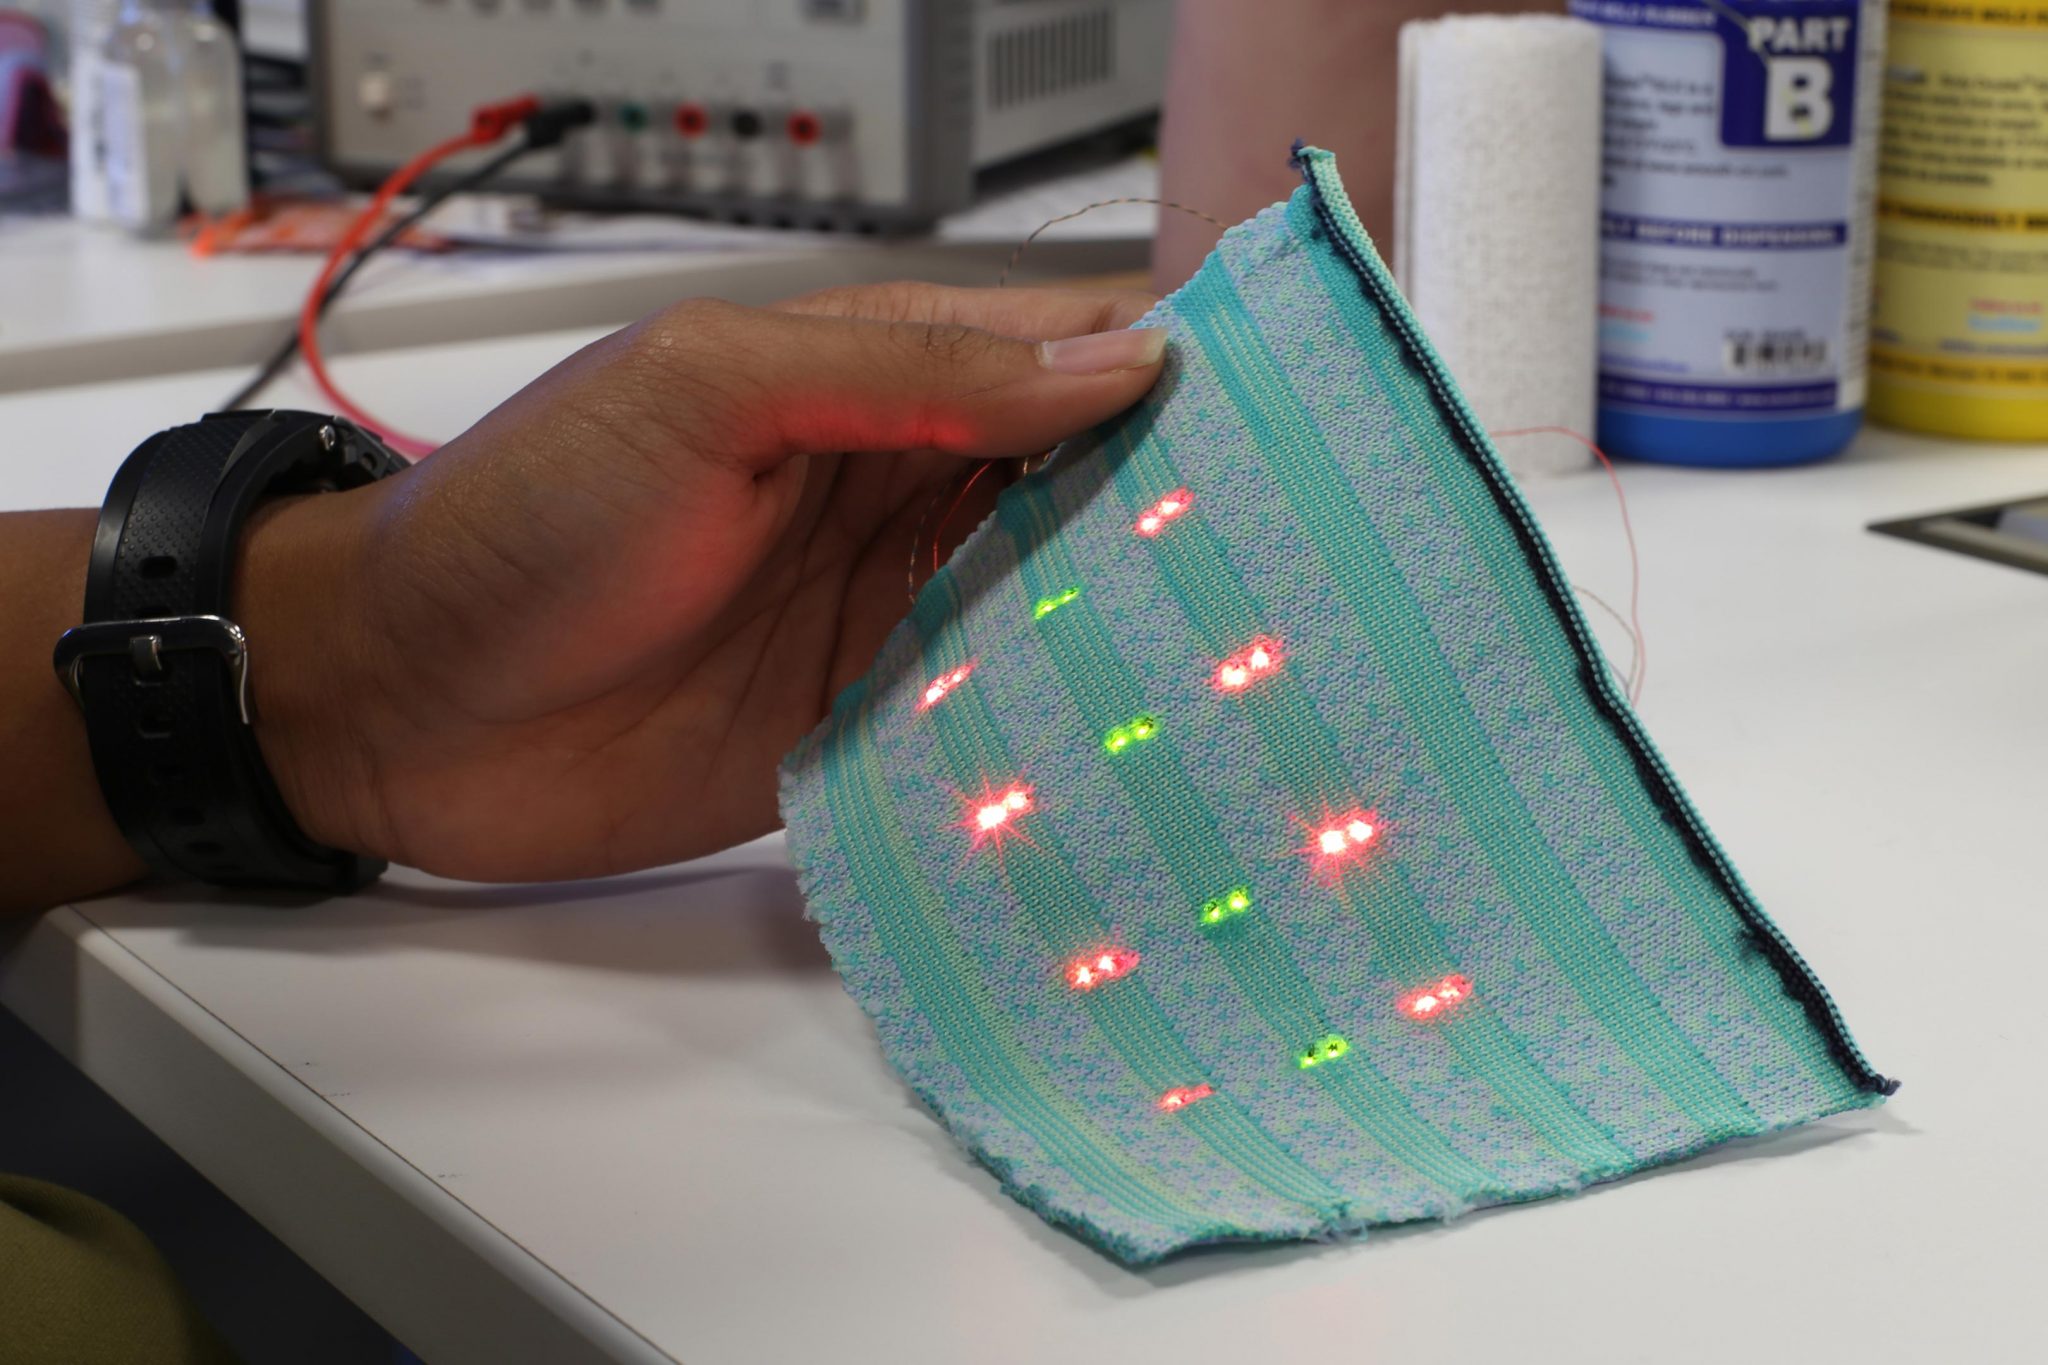 MIT Developed Sensors Woven Into Fabrics So a Shirt Can Monitor Vital Signs